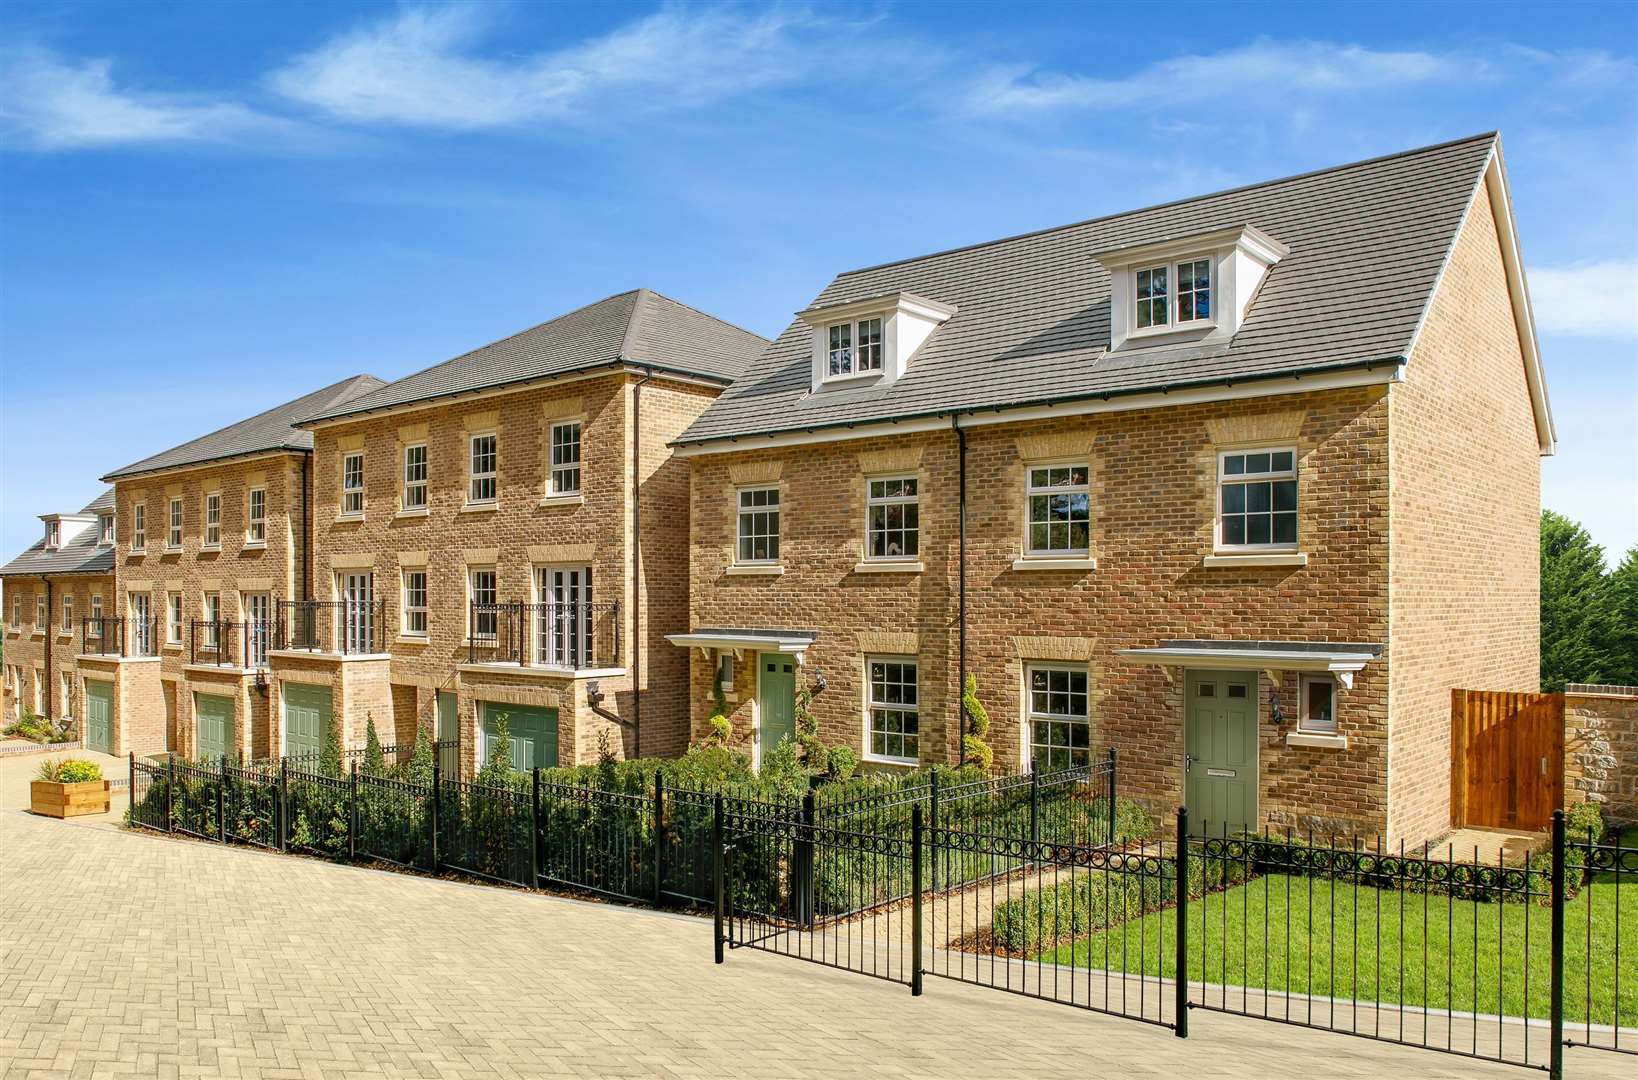 Redrow's The Mill at Springfield is in walking distance of the town centre